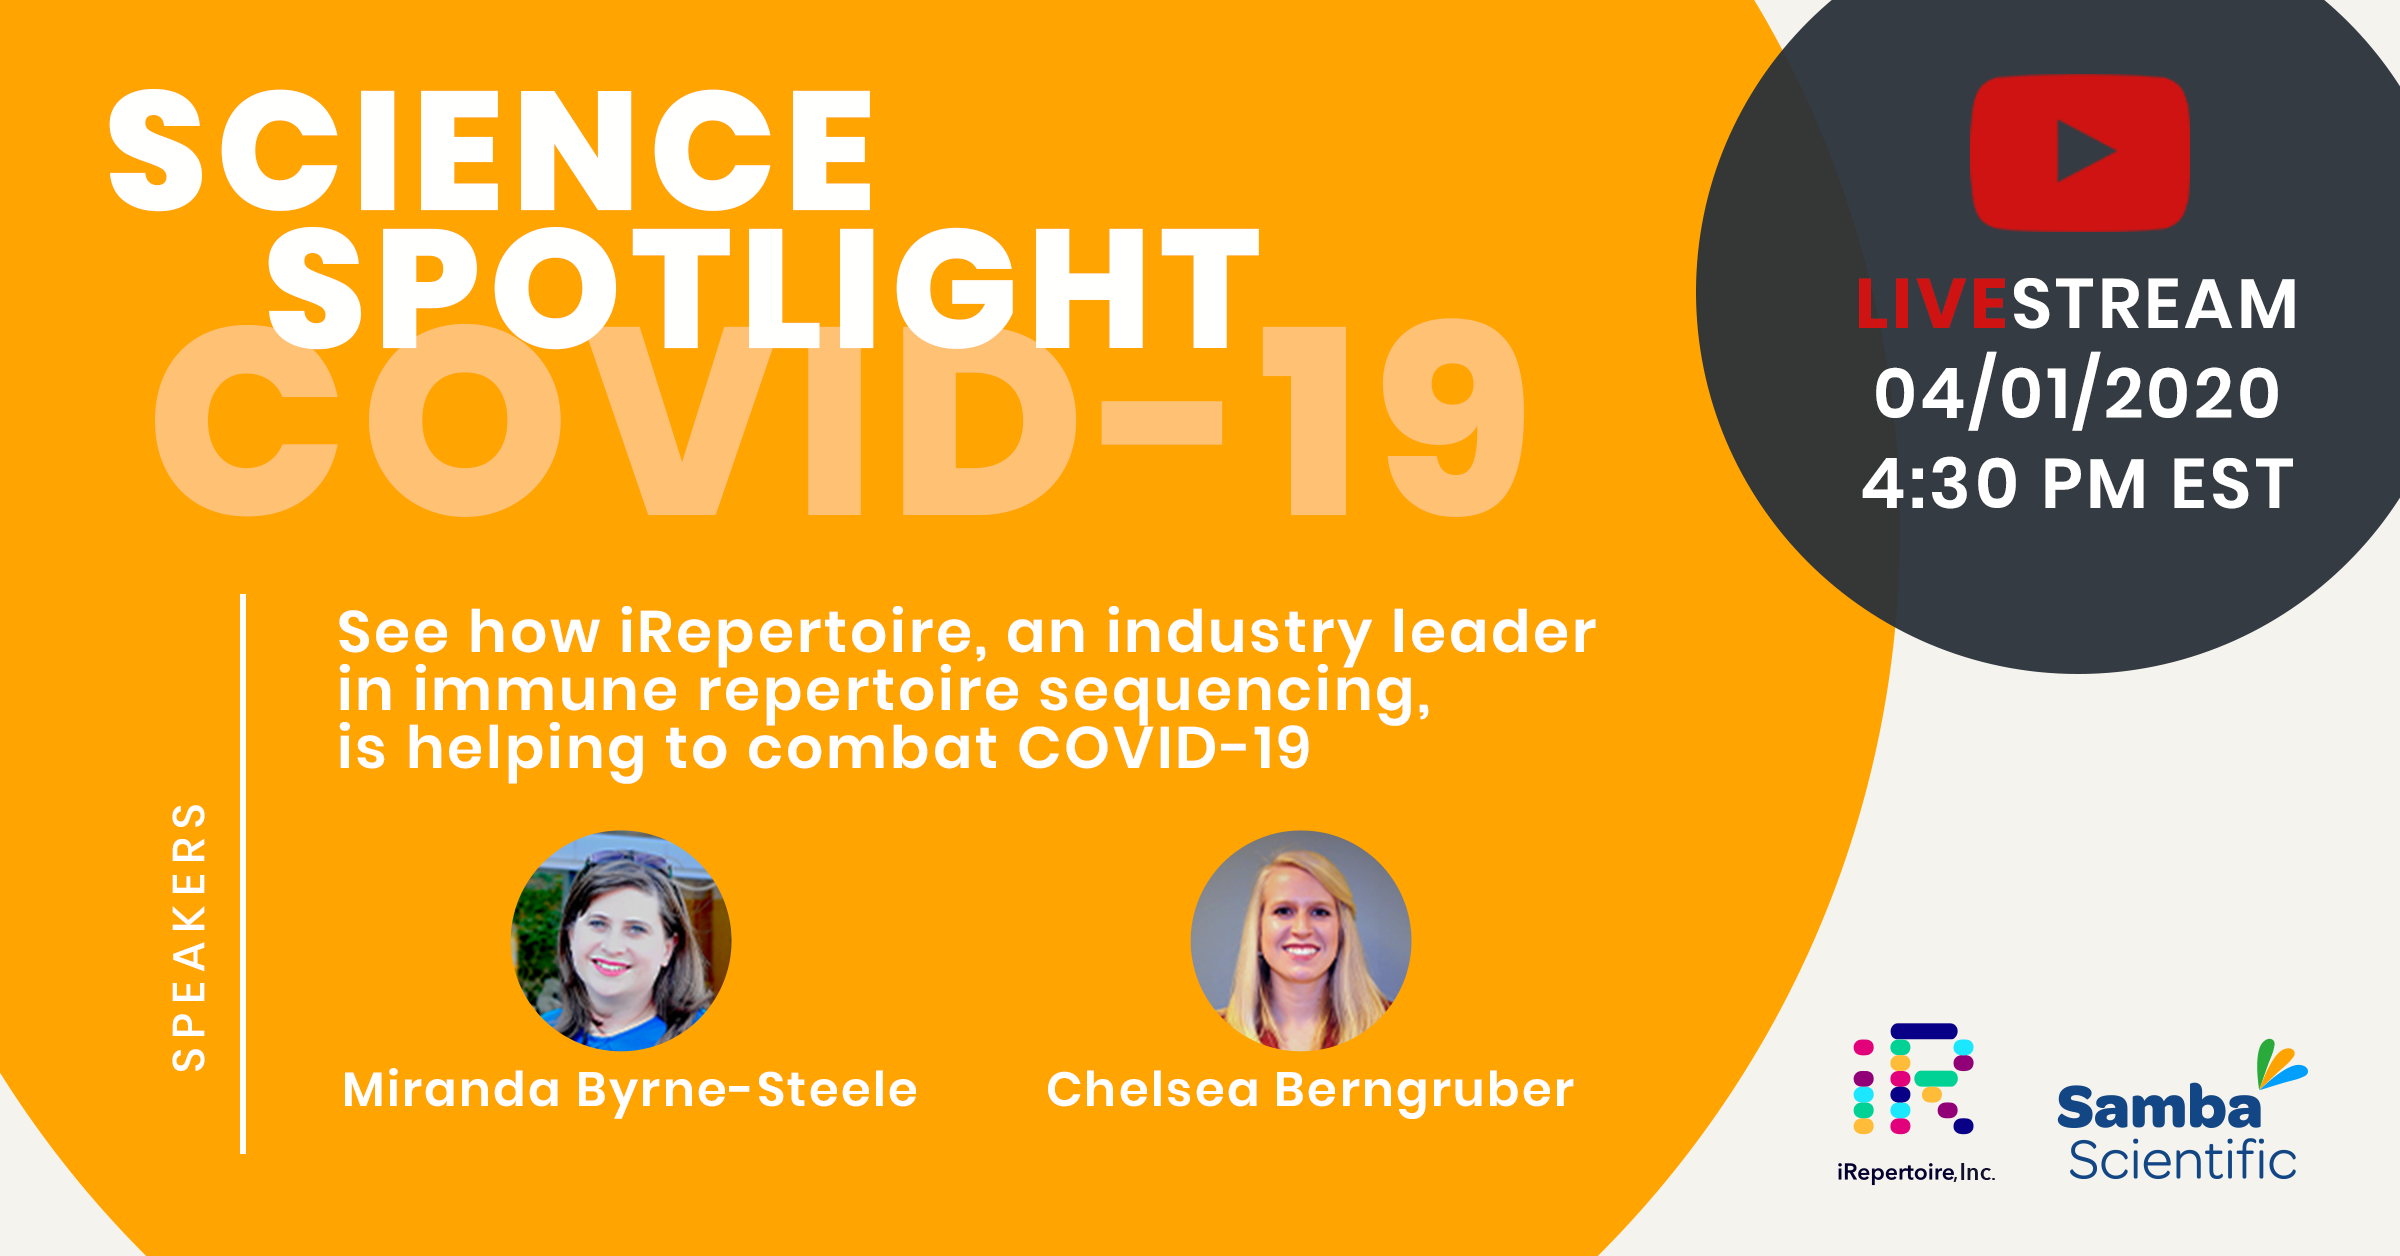 COVID-19 Science Spotlight on iRepertoire. See how iRepertoire, an industry leader in immune repertoire sequencing, is helping to combat COVID-19. Join speakers Miranda Byrne-Steele and Chelsea Berngruber in the YouTube LiveStream on March 1st, 2020 at 4:30 PM EST. Sponsored by Samba Scientific.